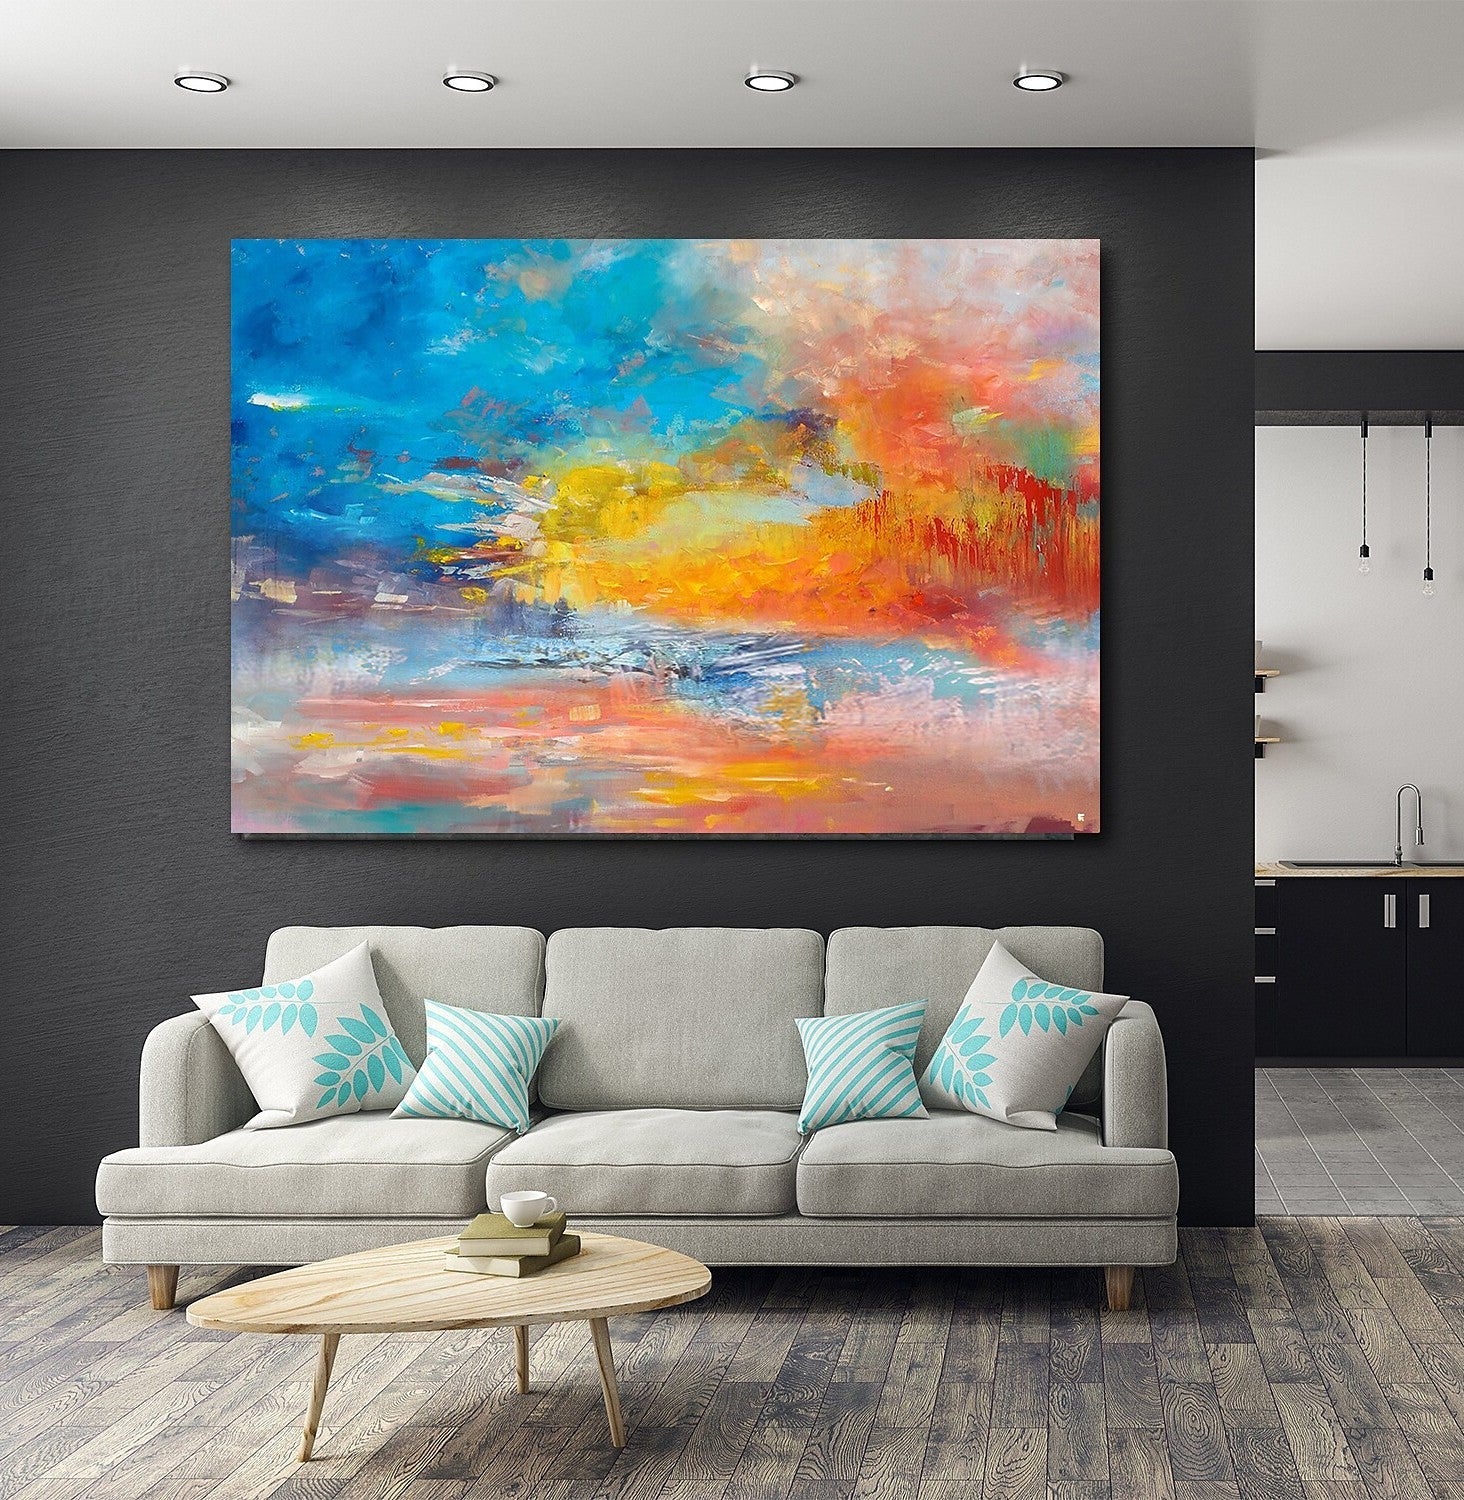 Large Paintings for Living Room, Buy Paintings Online, Wall Art Paintings for Bedroom, Simple Modern Art, Simple Abstract Art-ArtWorkCrafts.com